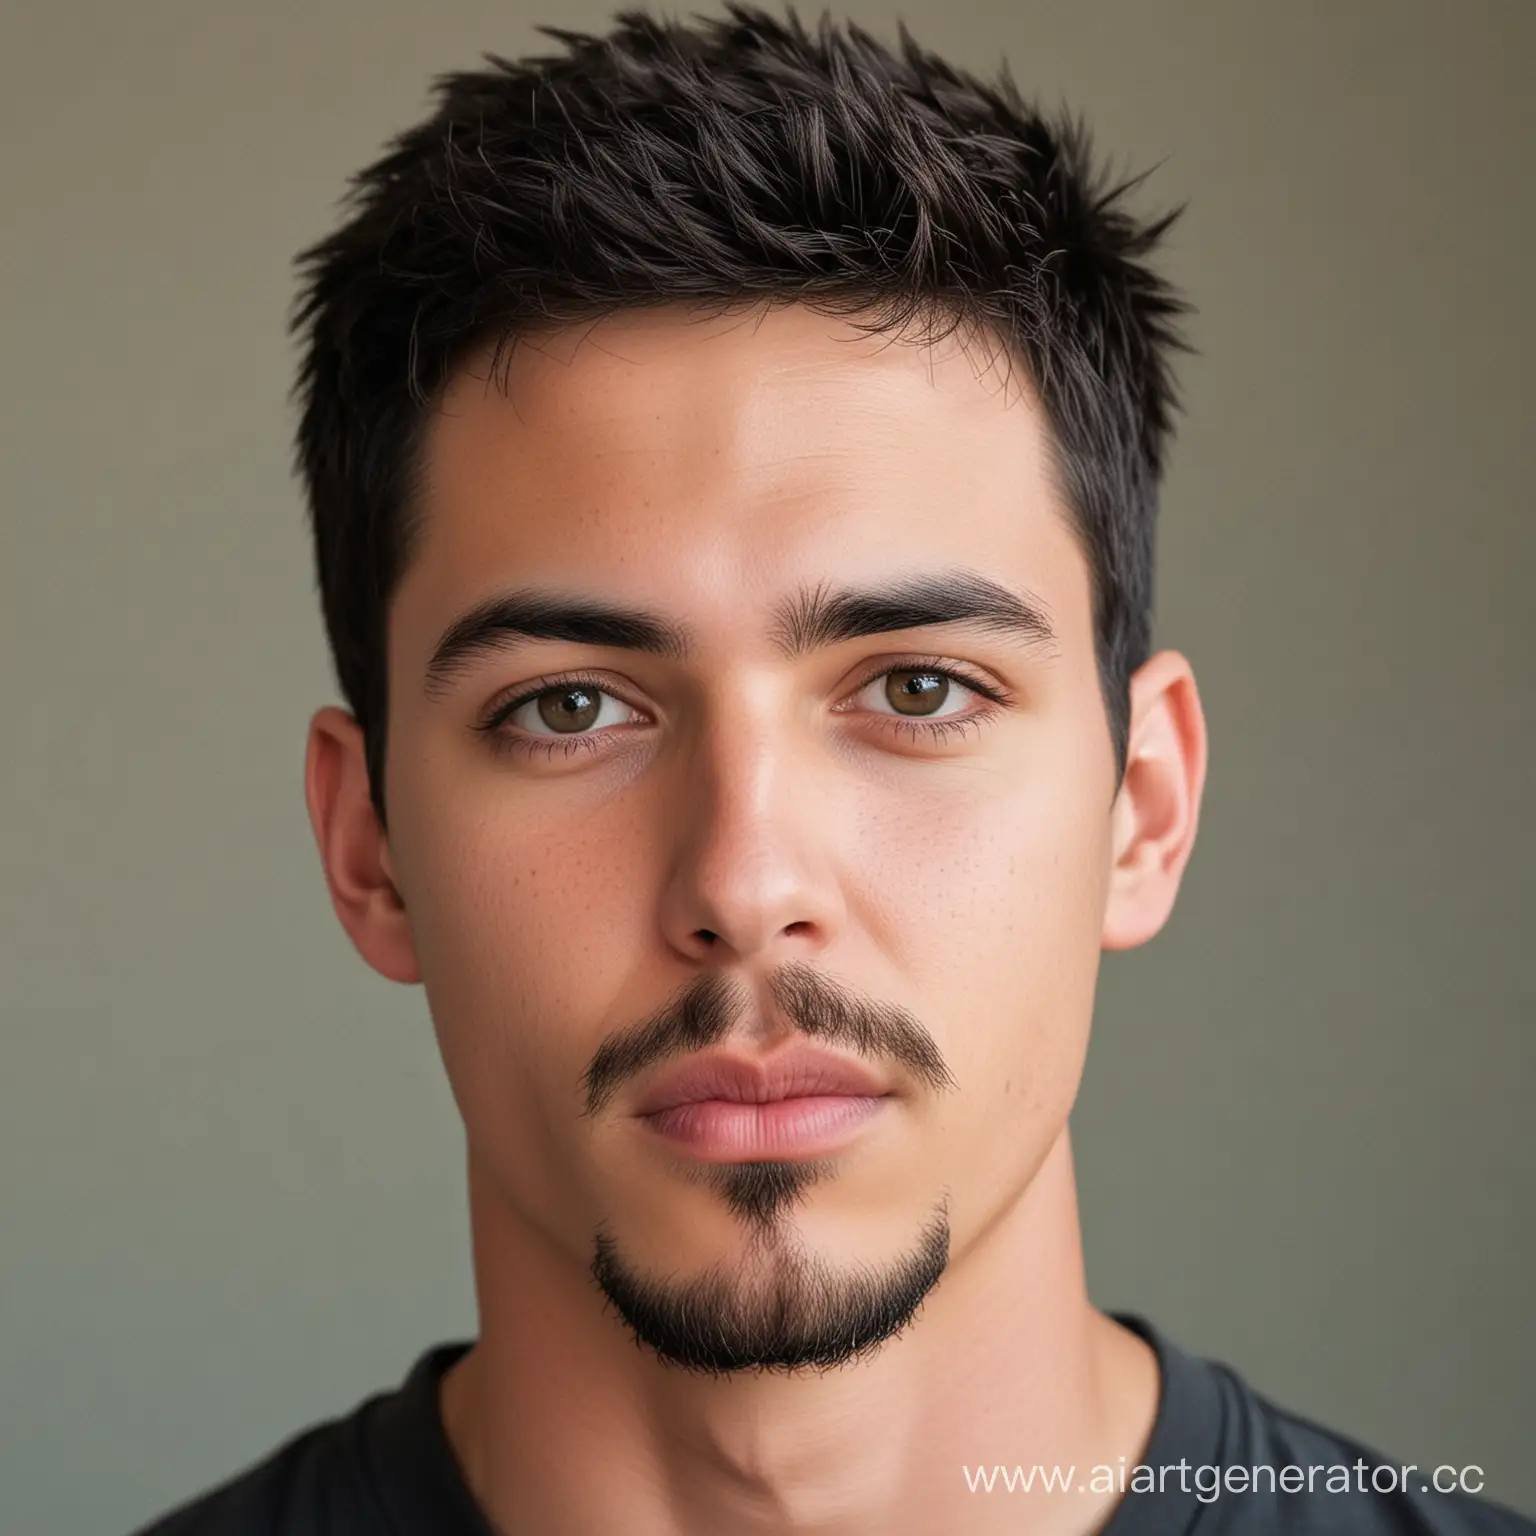 Portrait of a young man with sharp features, short black hair, and a goatee.